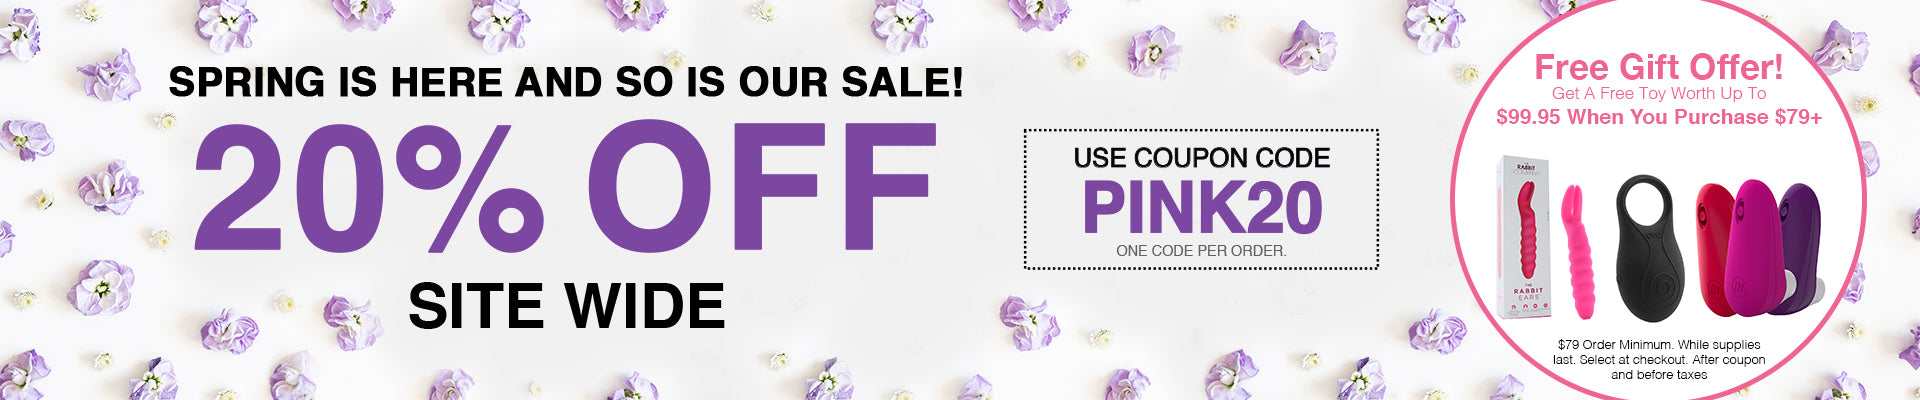 20% Off Site Wide - Use Code PINK20